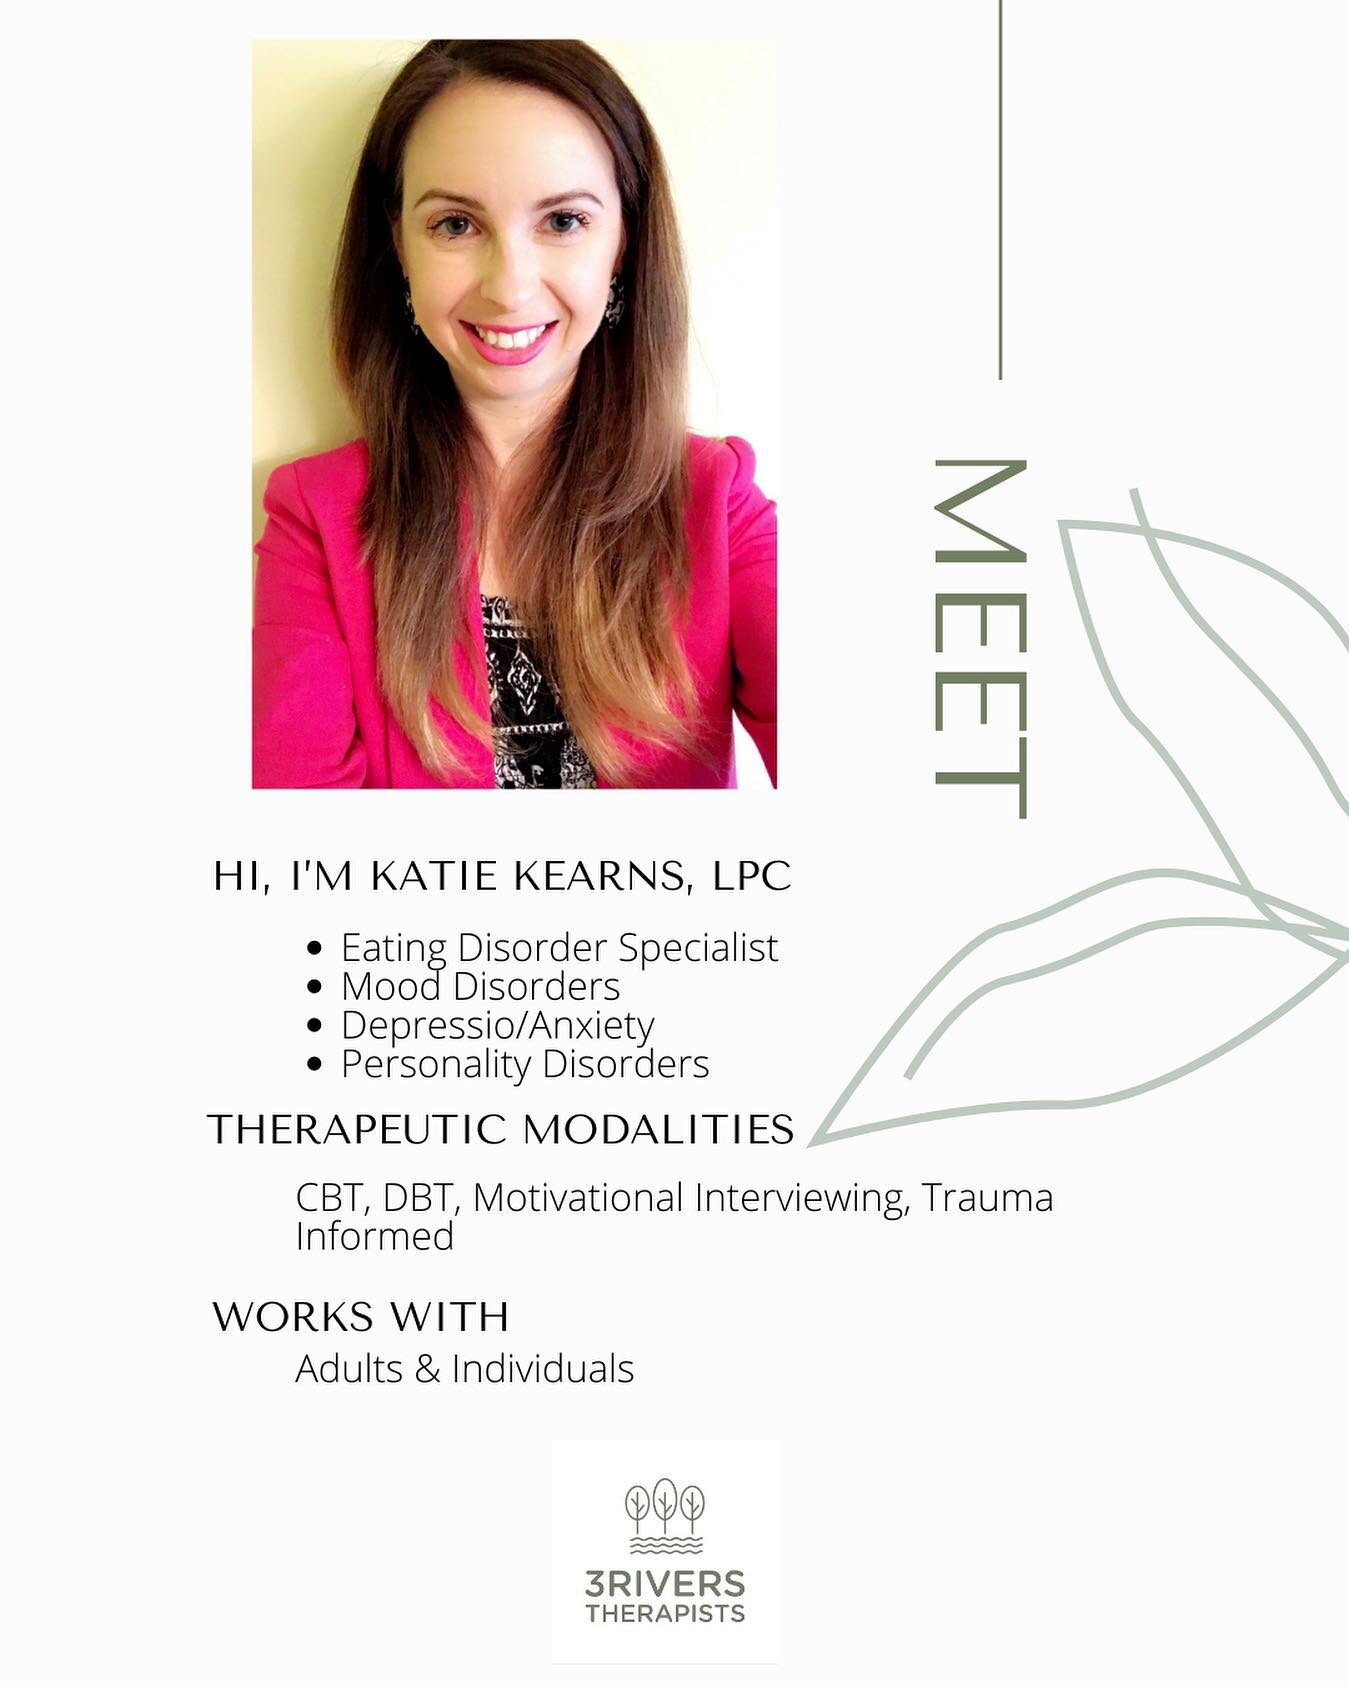 👋 Katie Kearns brings strong clinical skills &amp; an authenticity to the practice. She utilizes her skill set in DBT to empower and guide her clients towards health and wellness. 

#lovewhatyoudo #pittsburghtherapist #mentalhealth #mentalhealthmatt